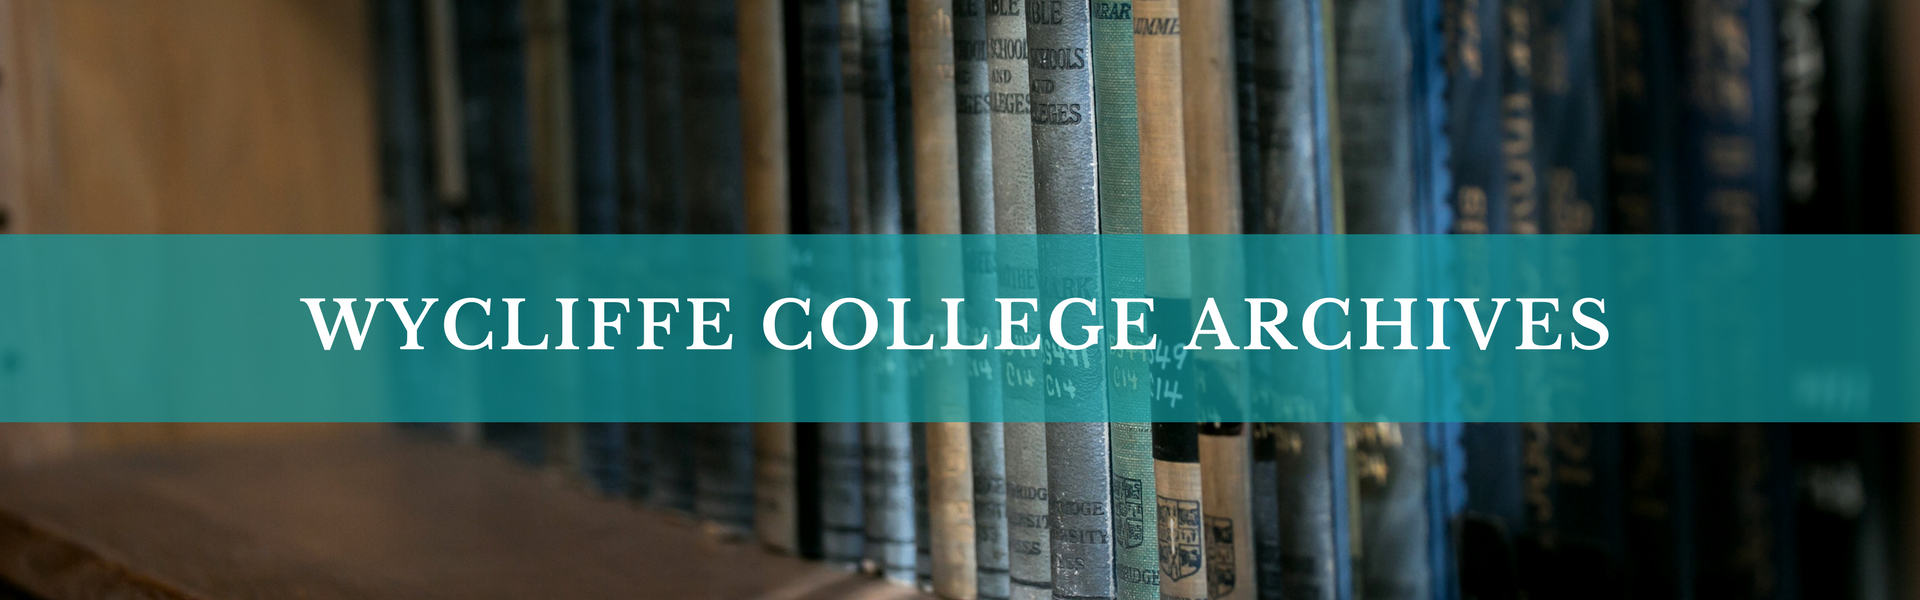 Wycliffe College Archives Banner